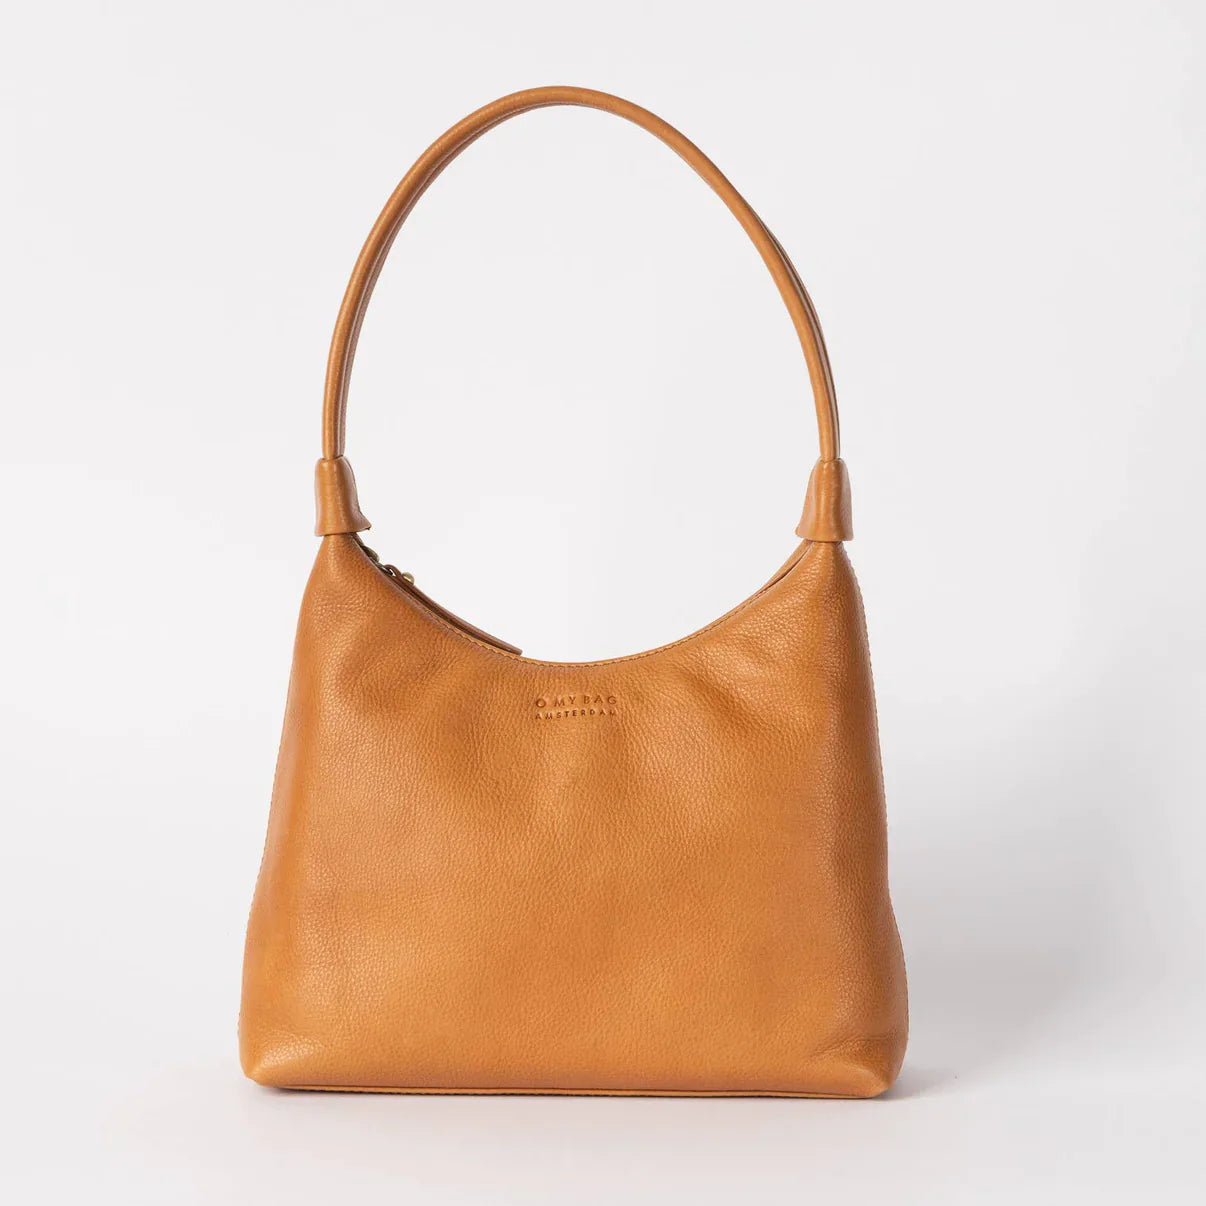 cognac leather bag from o my bag in poppy & hawk leather gifts collection